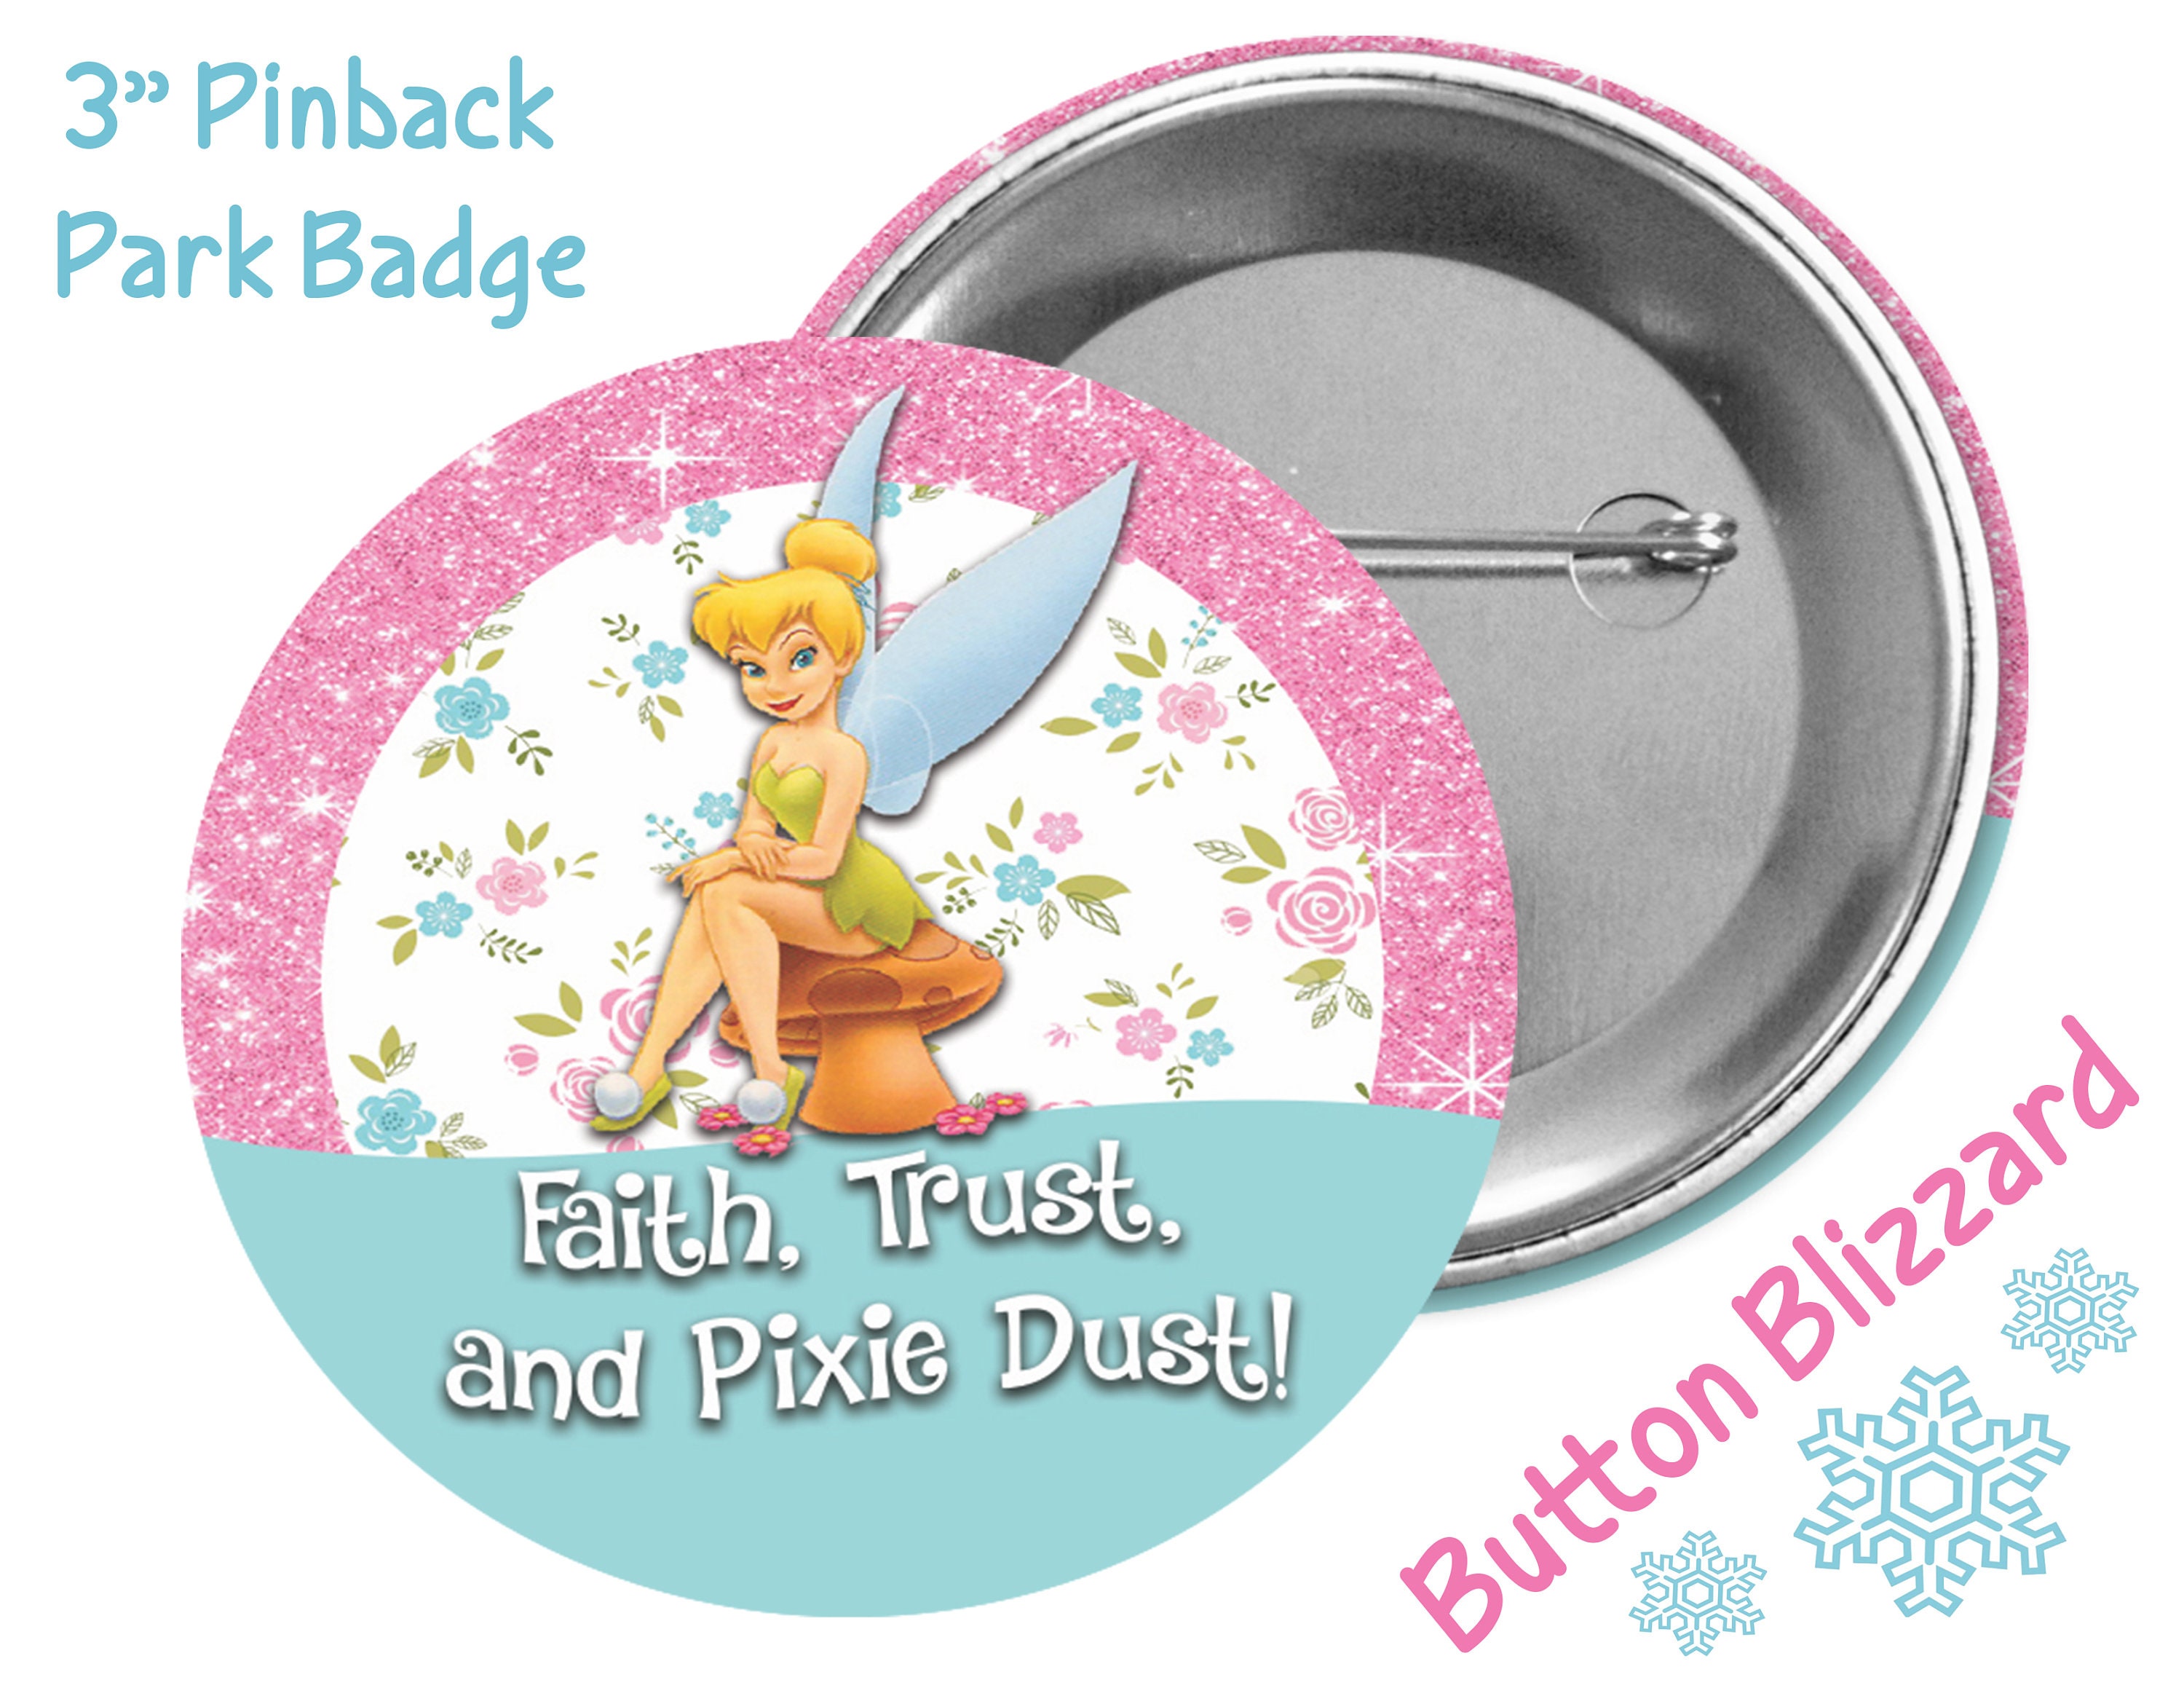 Pixie Dust Pack 6 Sets of My Disney Pin Trading Starter Sets Fish